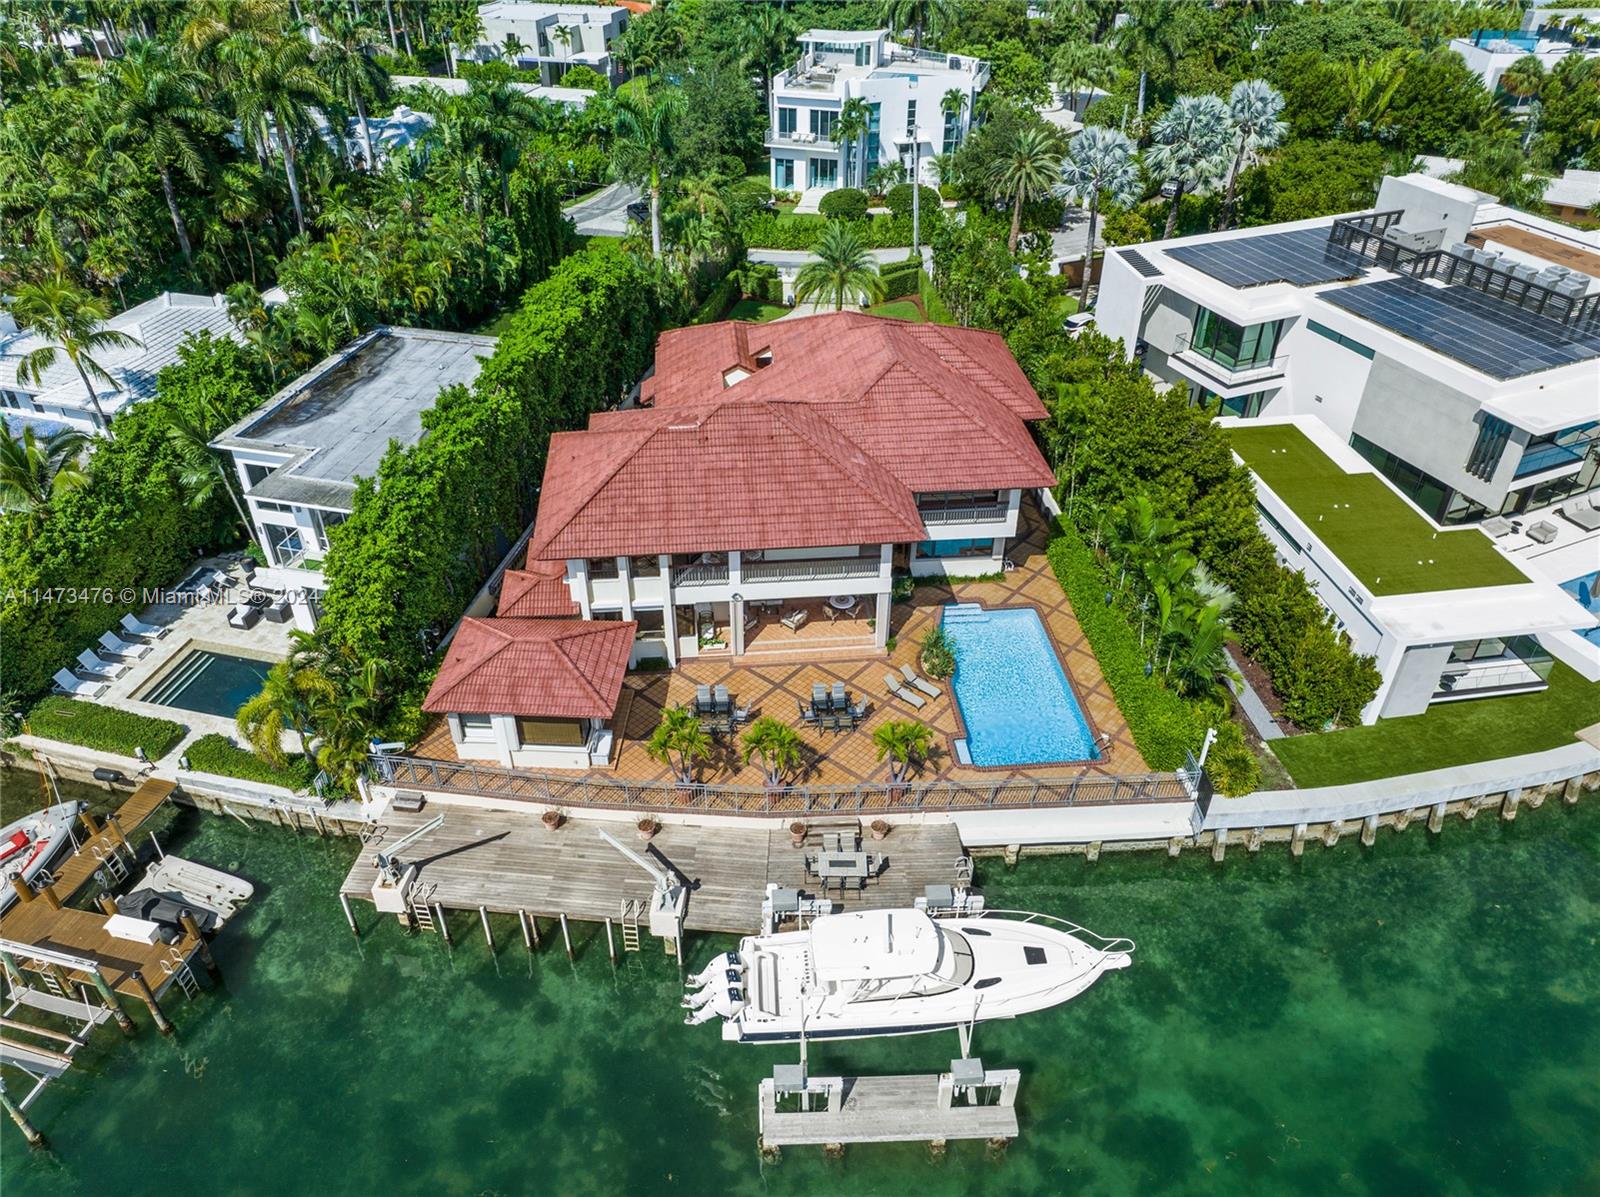 HUGE PRICE REDUCTION! BRING ALL OFFERS! WON'T LAST. AND BRING YOUR TOOTHBRUSH FOR THIS MOVE-IN READY WATERFRONT MANSION! Richly detailed and filled with light, this stunning residence sits adjacent to the clear waters of Biscayne Bay on Miami Beach. Nestled on the Venetian Causeway right in between the City of Miami and South Beach, the location is, well… PERFECT. Get to downtown Miami or South Beach in just a few short minutes.

Featuring six bedrooms and six bathrooms, this home sits on a 12,906 sq. ft. pie-shaped lot that boasts 100 linear feet on the water (note: most waterfront homes located on the Venetian Causeway have only 60 linear feet on the water). The property has a boat elevator lift and two boat davit cranes. BEST DEAL FOR A WATERFRONT HOME ON EXCLUSIVE VENETIAN ISLANDS!